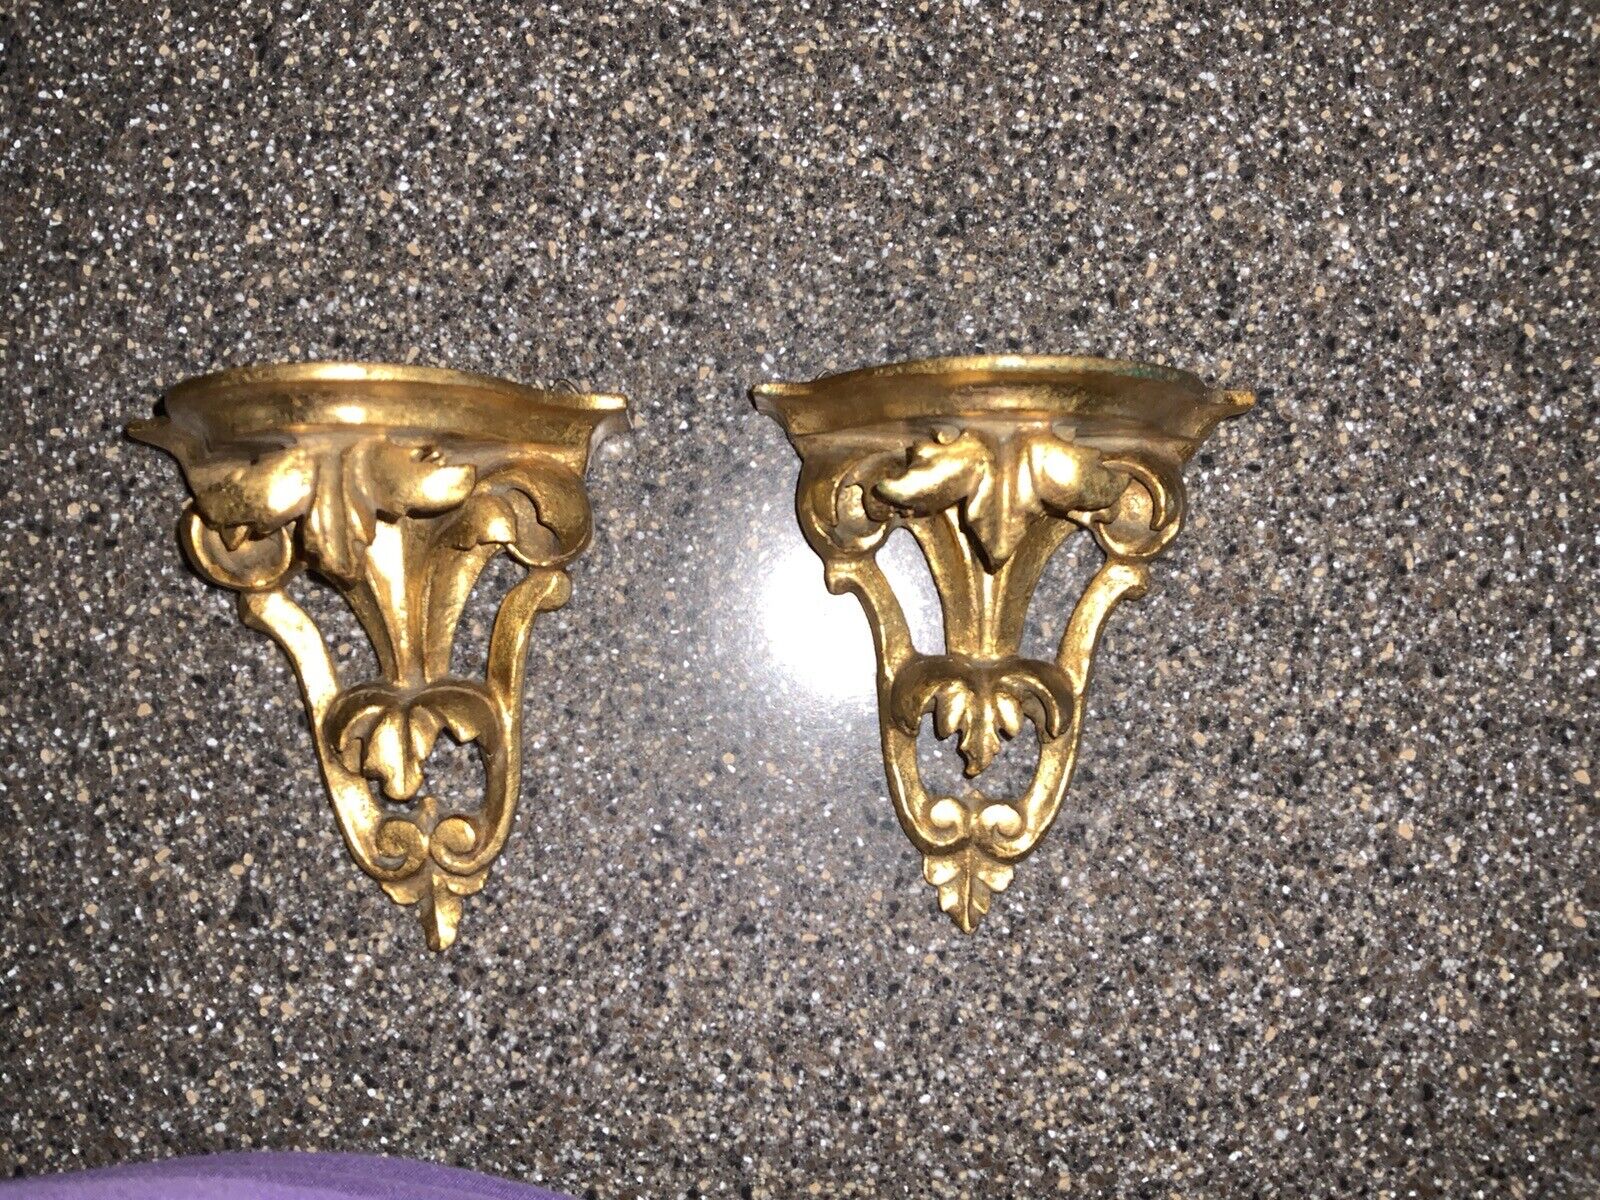 Pair of Italian Baroque Shelf Rococo Sconces Carved Wood Gold Gilt